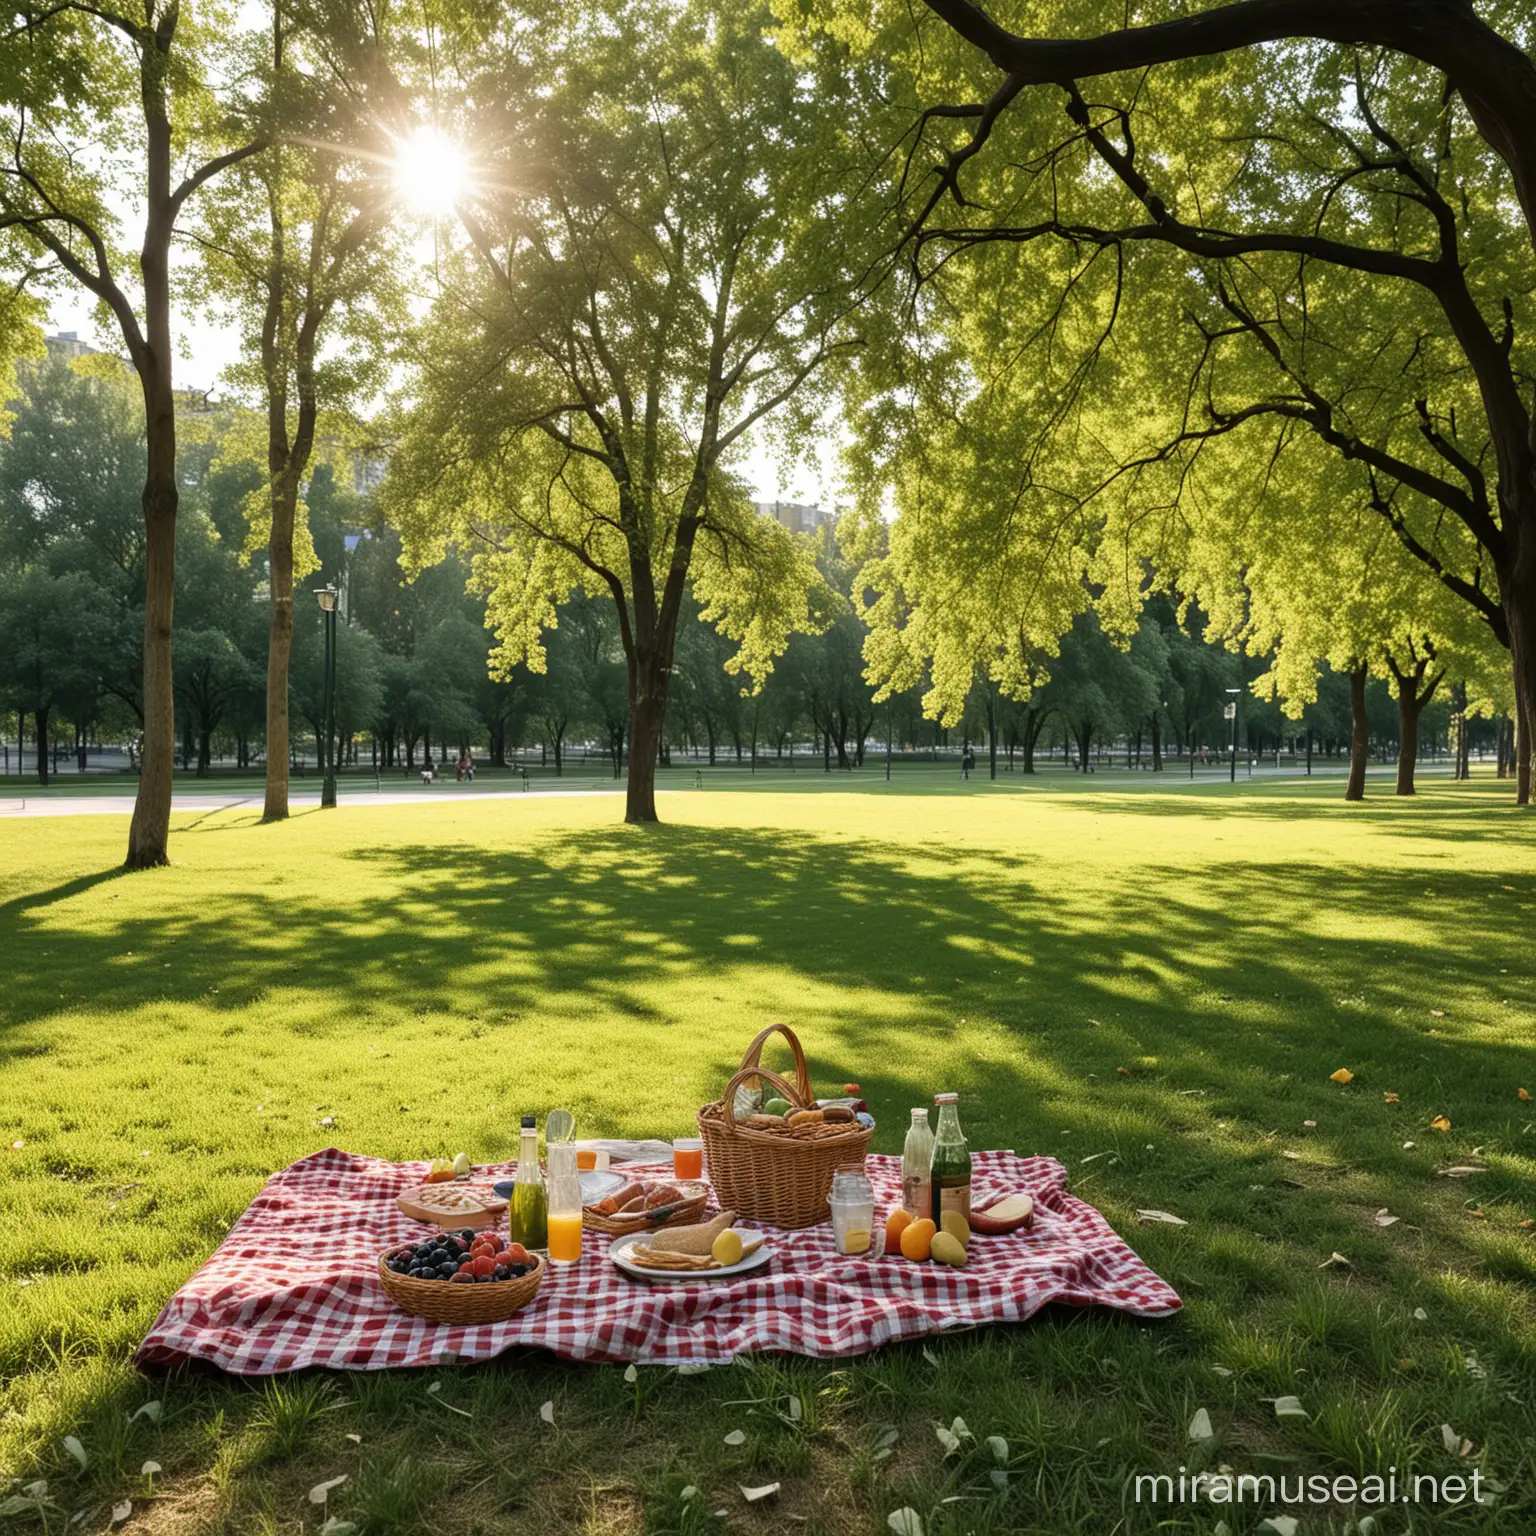 picnic in a urban park, no people
